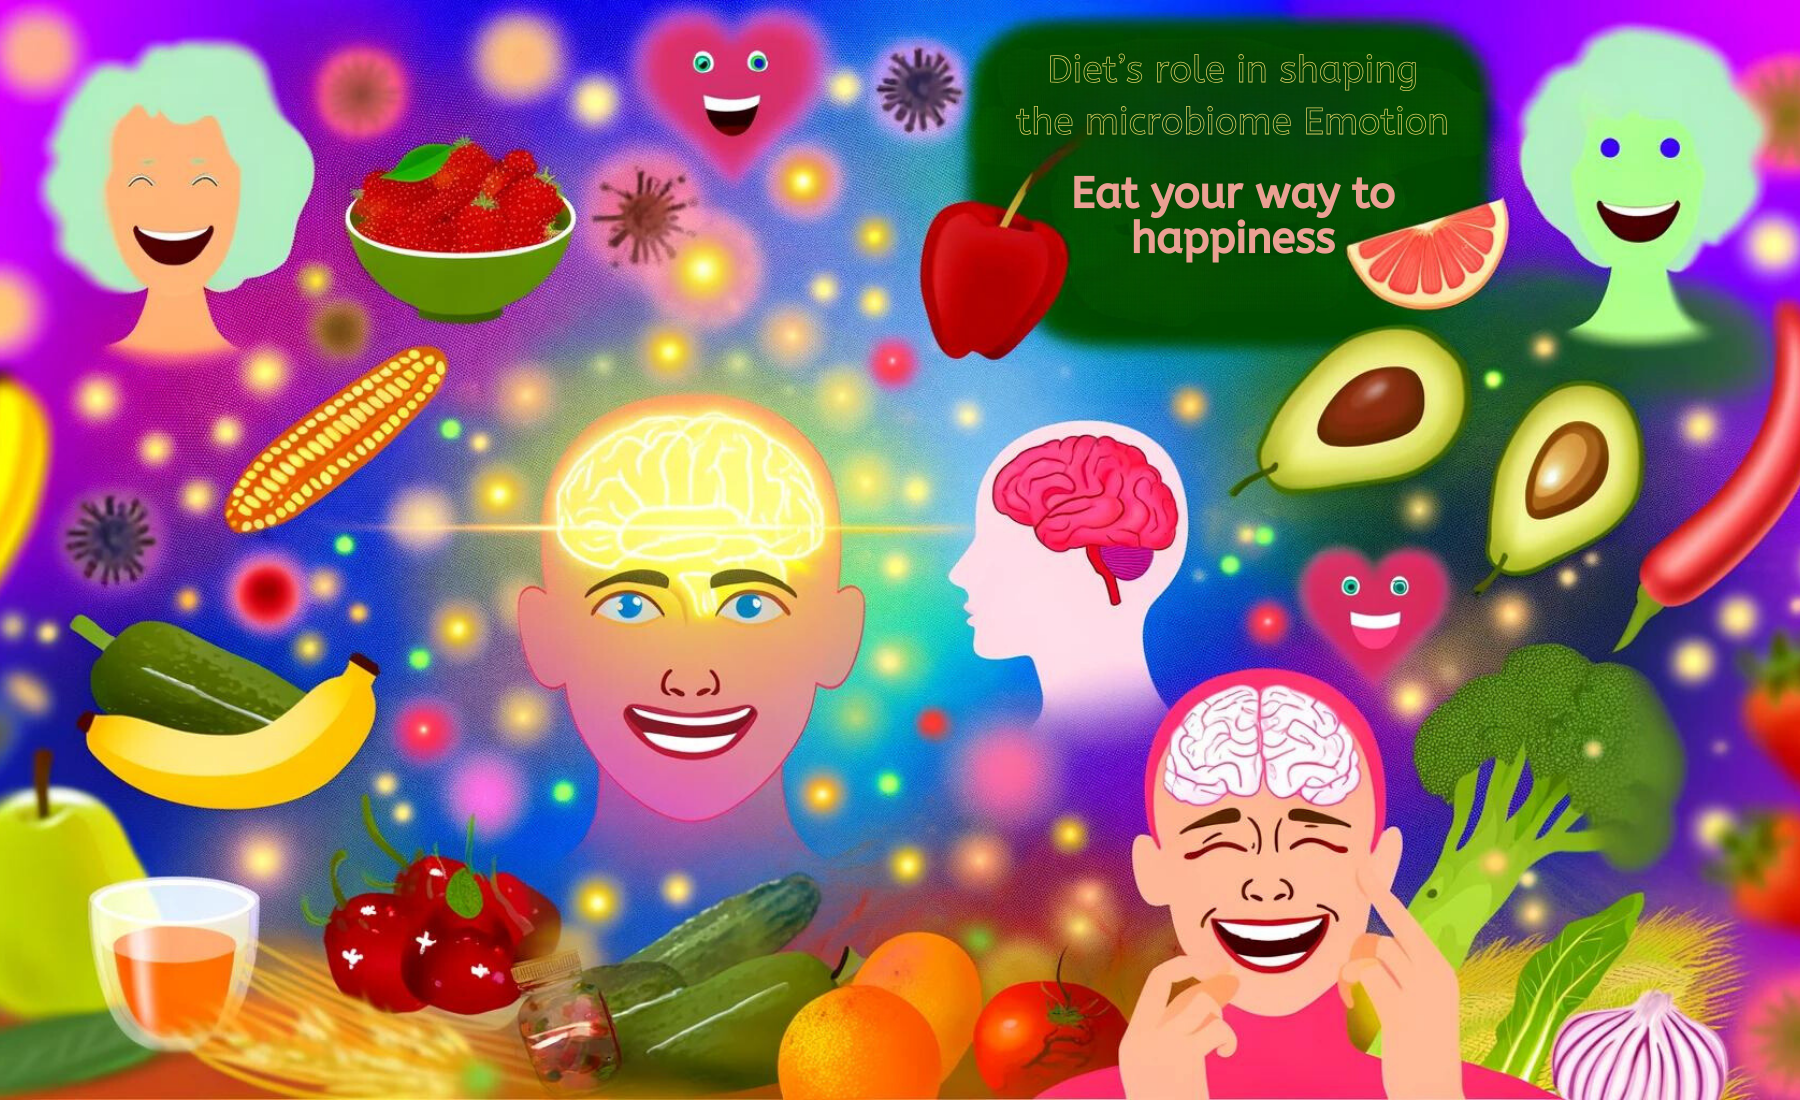 Diet's Role in Shaping the Microbiome and Emotions: Eat Your Way to Happiness